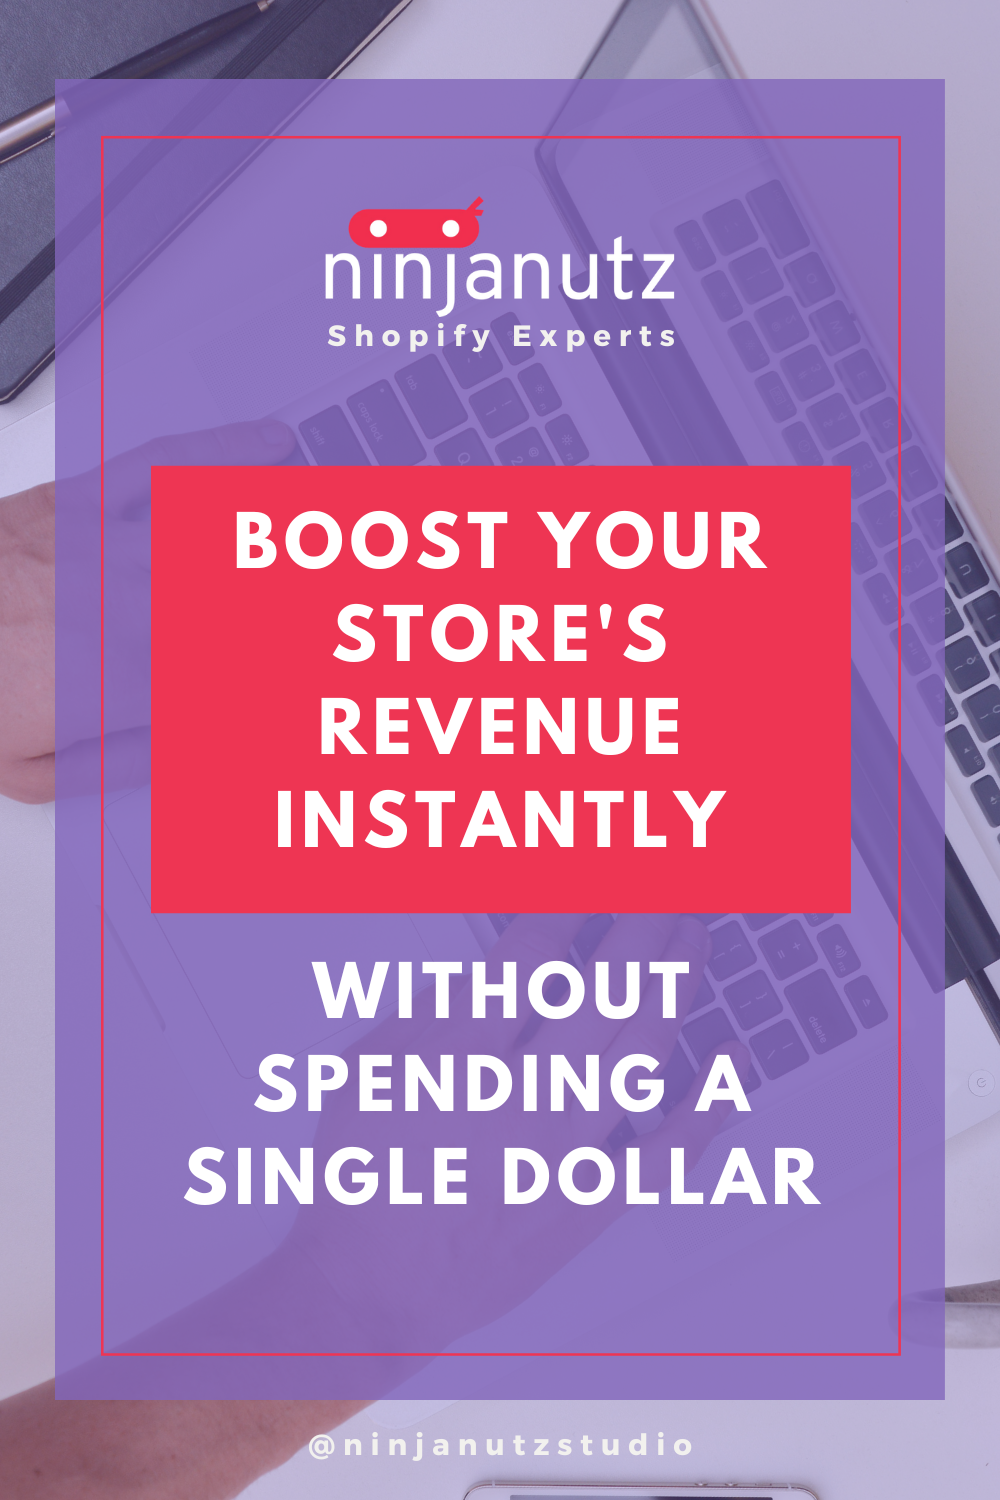 Boost Your Store's Revenue Instantly without spending a single dollar